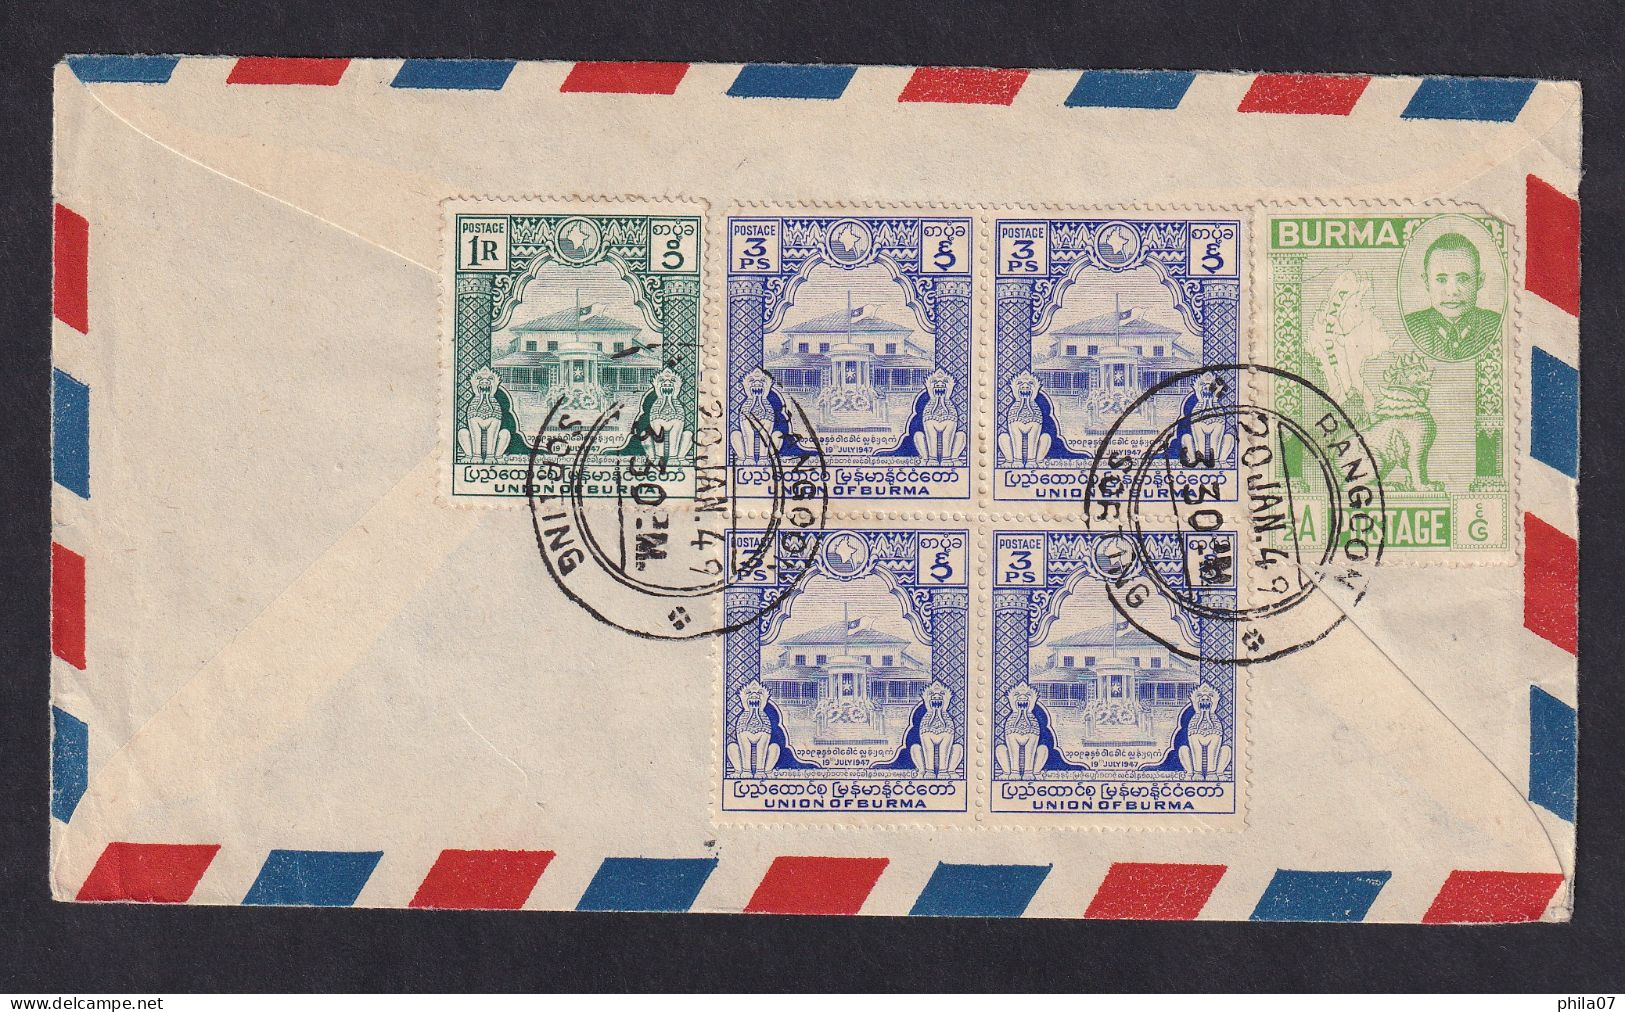 BURMA - Envelope Sent Via Air Mail From Rangoon To USA 1949, Nice Mass Franking On The Back / 2 Scans - Altri - Asia